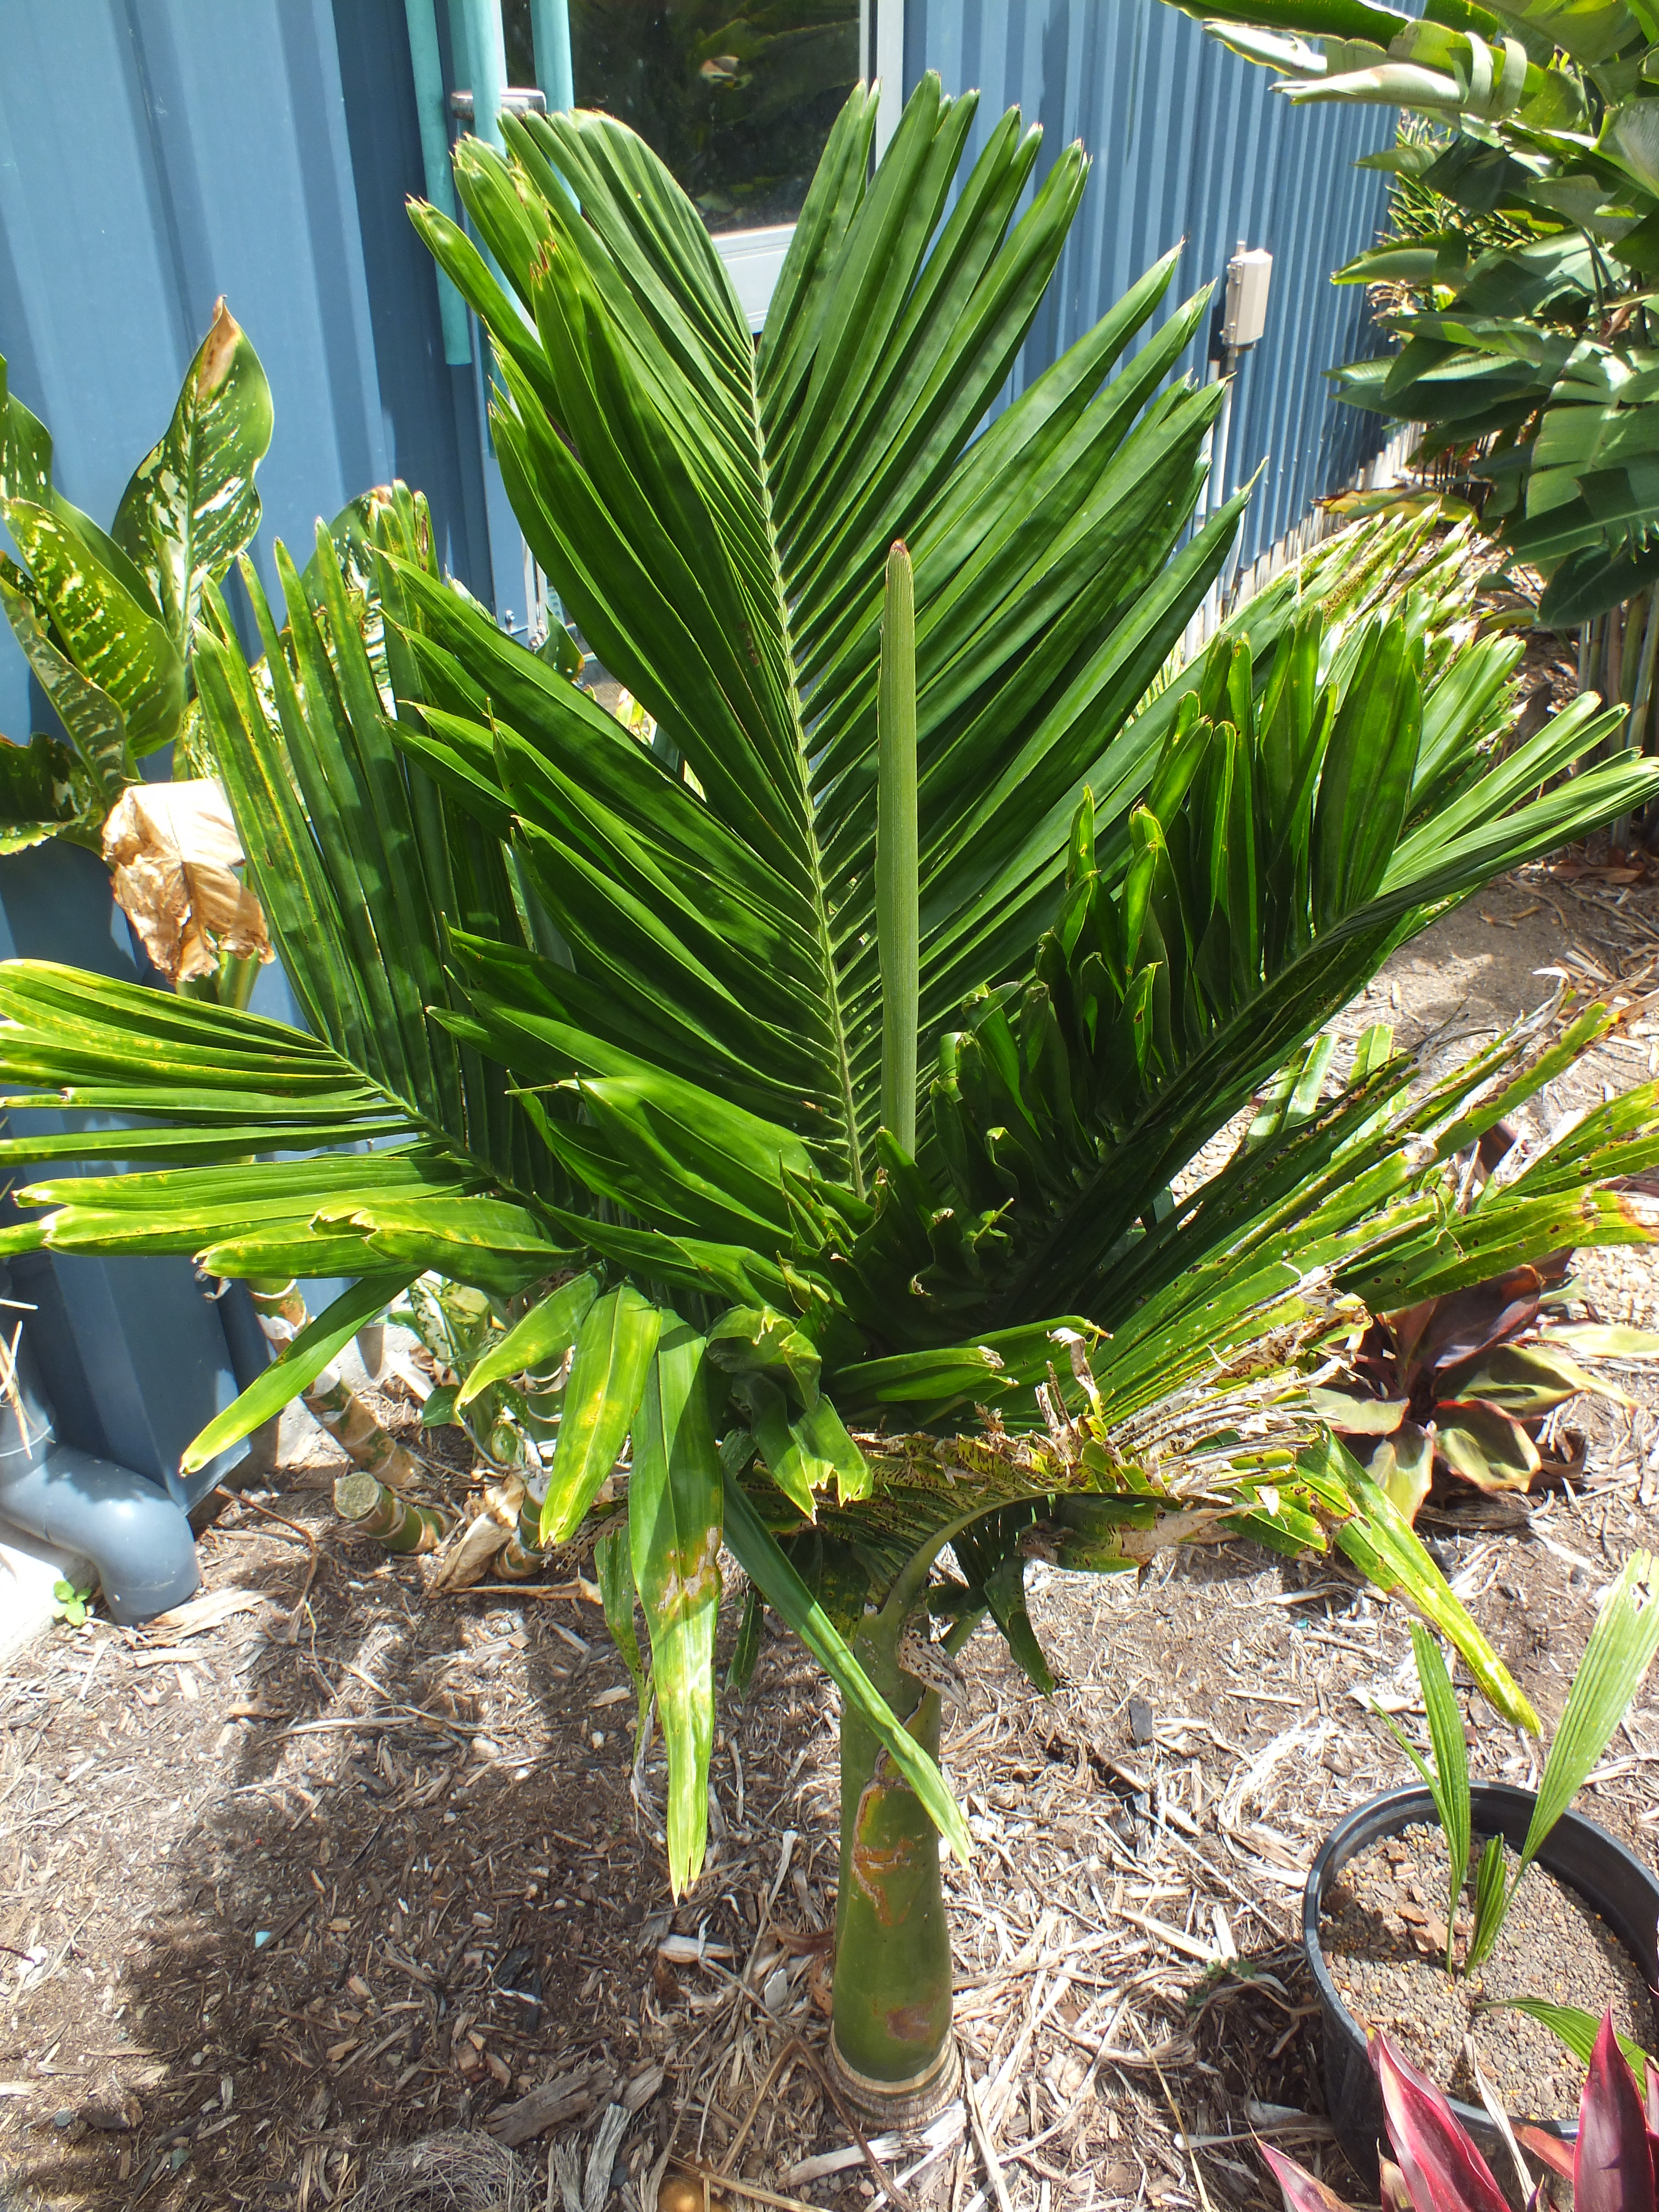 Dwarf Areca Catechu in South Florida - DISCUSSING PALM TREES WORLDWIDE